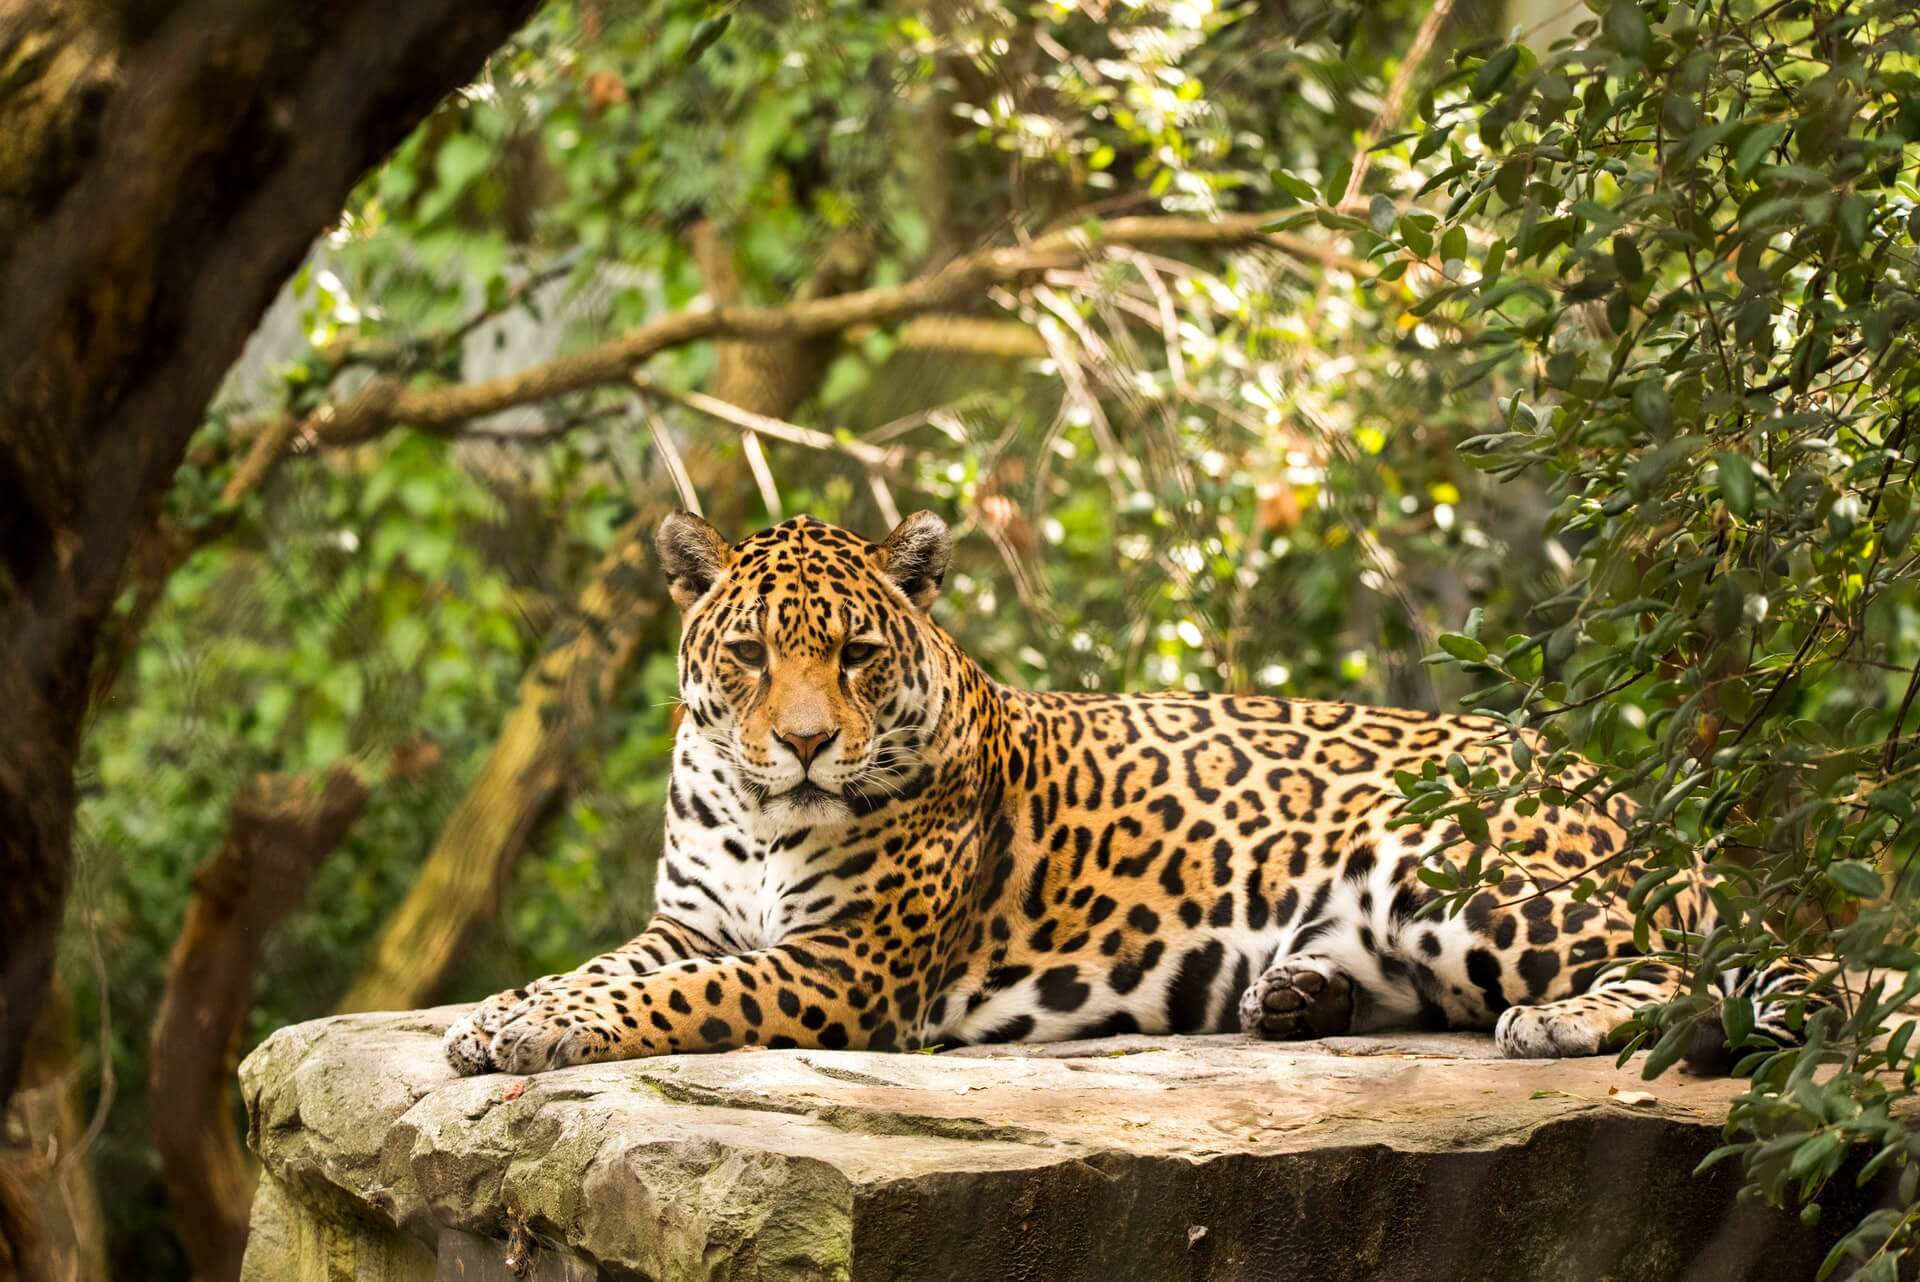 An increase to more than 1.3 million hectares of land (5000 sq miles) will make Calakmul the largest protected tropical forest north of the Orinoco River—all motivated by jaguar conservation.